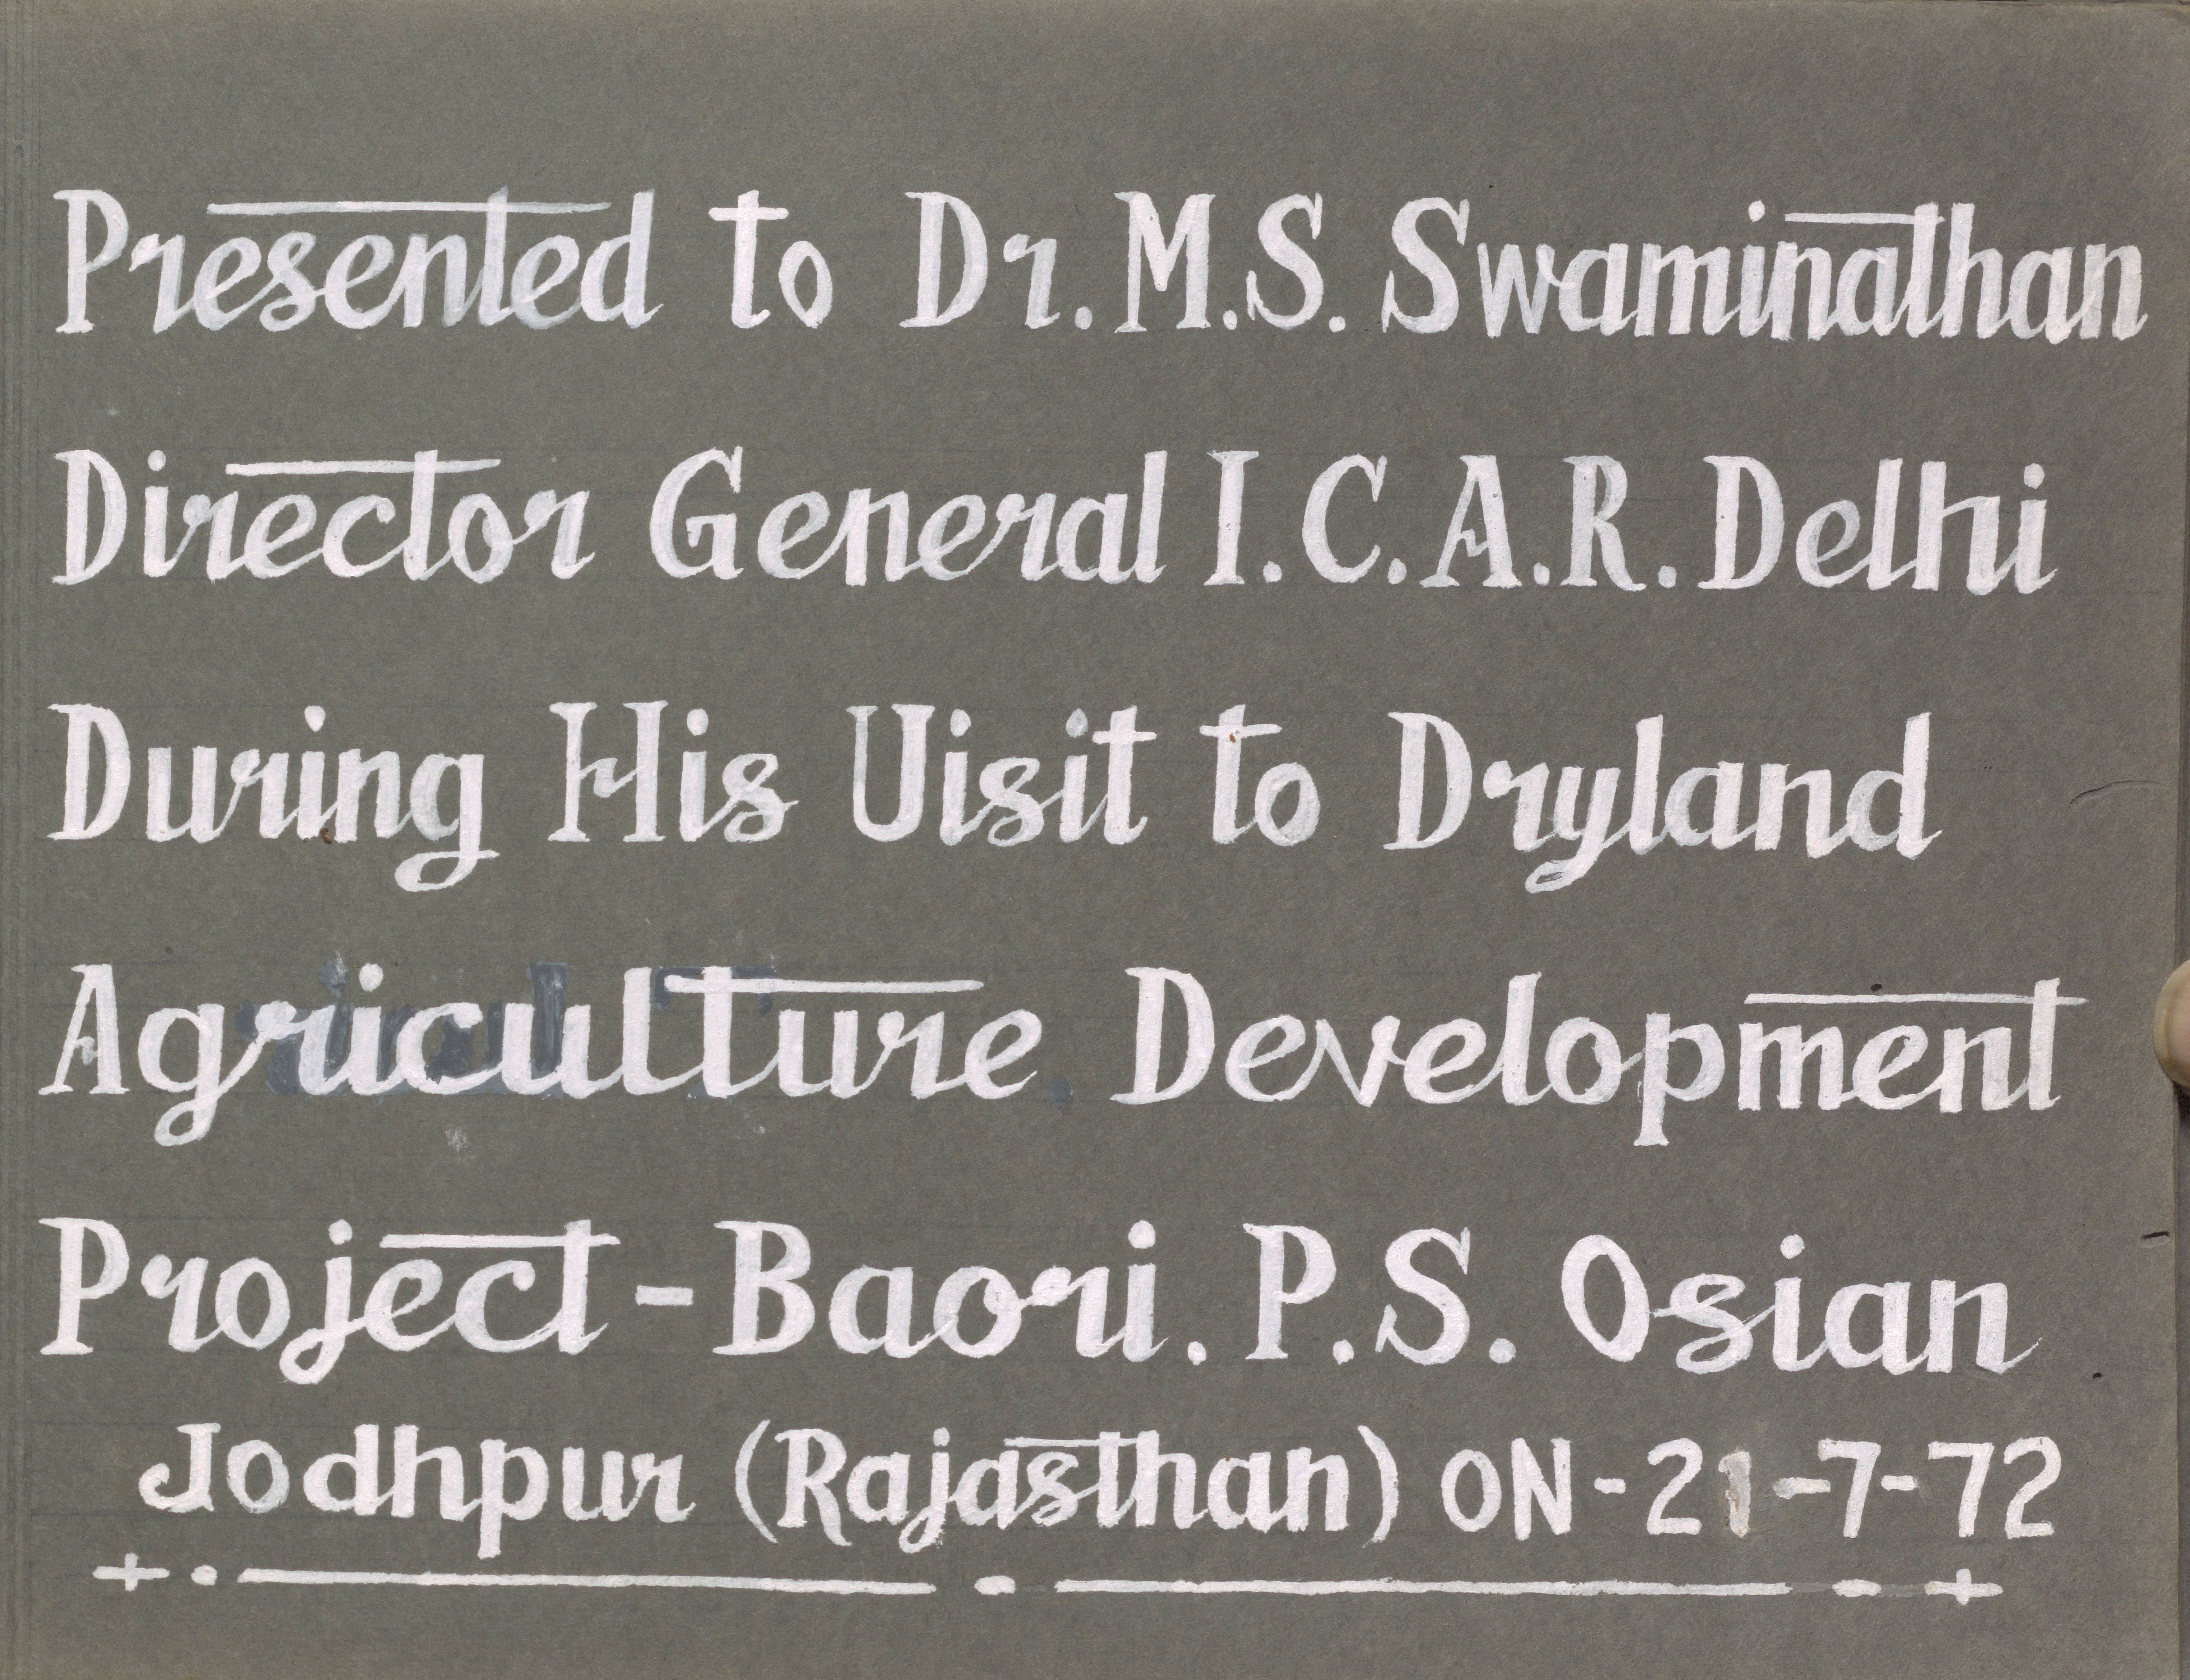 Visit of M.S. Swaminathan to Dryland Agricultural Development Project, Baori, Rajasthan